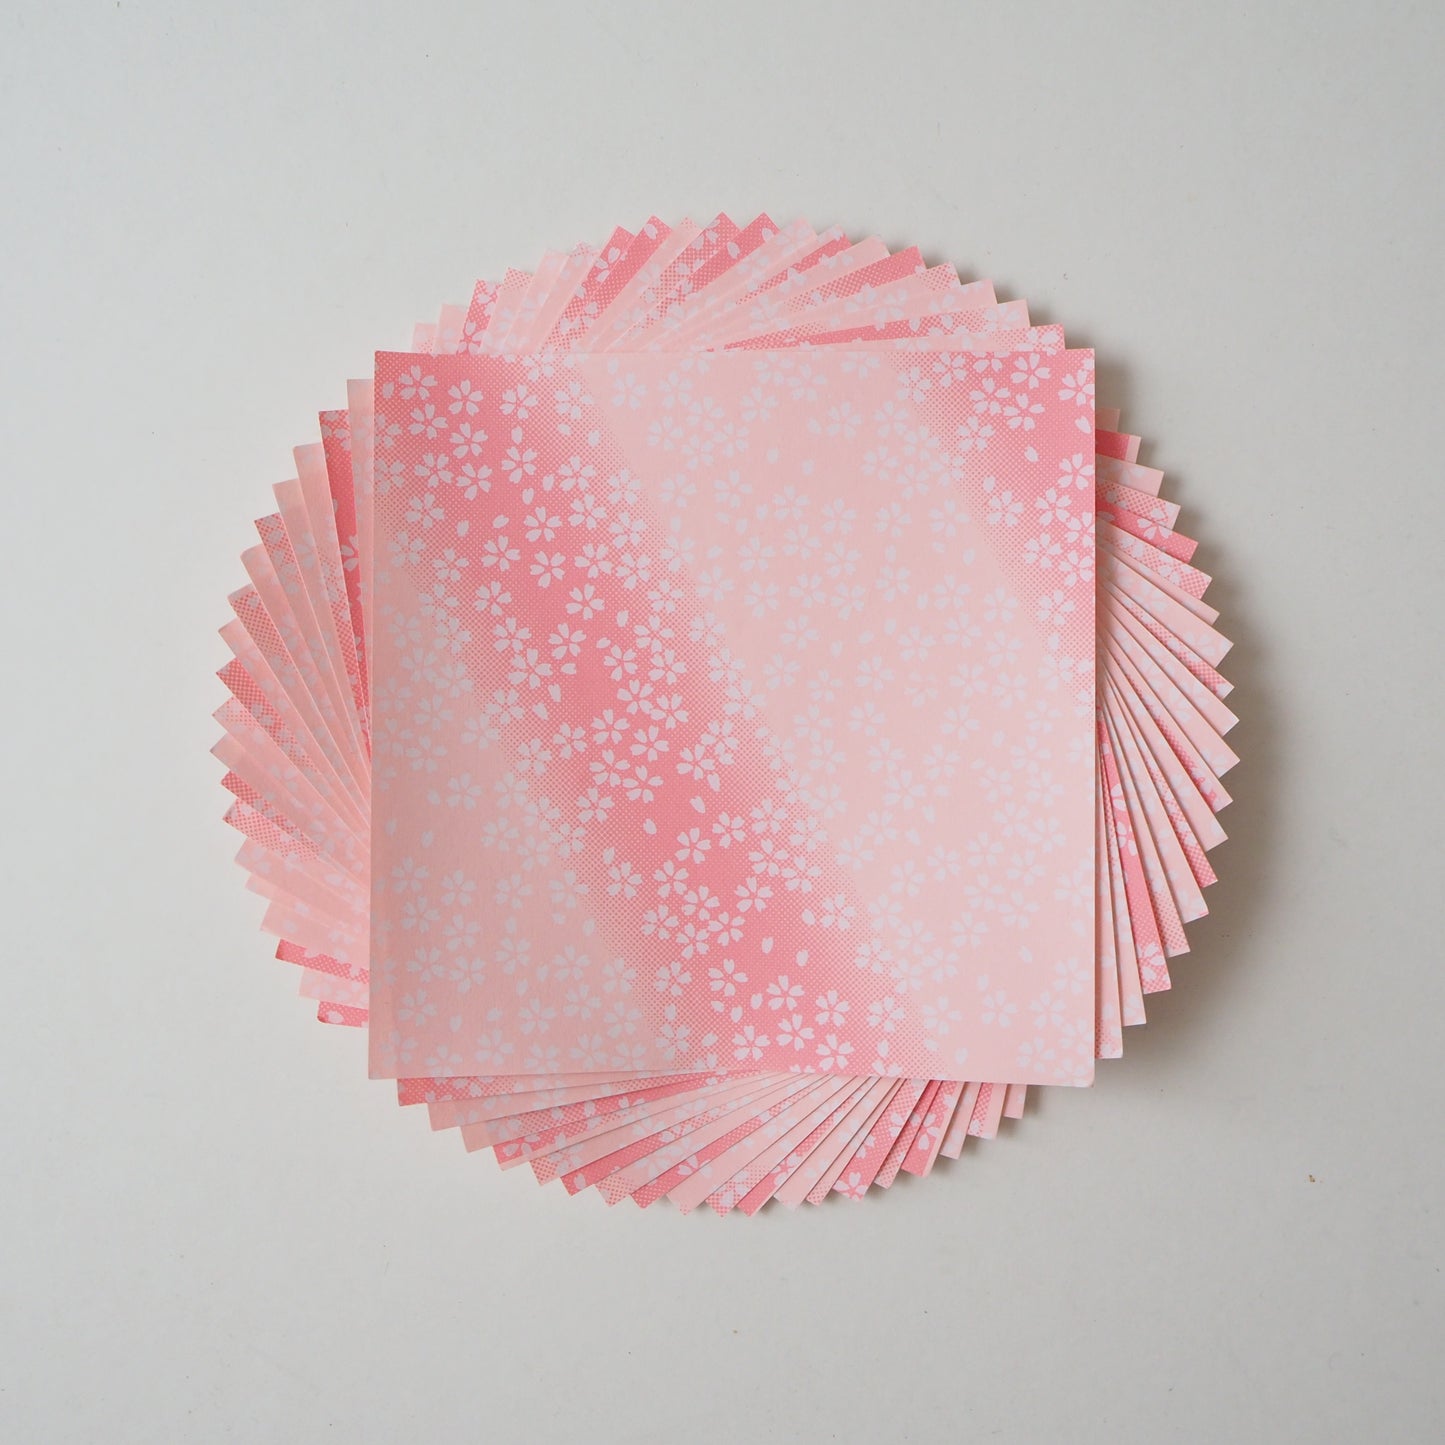 Pack of 20 Sheets 14x14cm Yuzen Washi Origami Paper HZ-121 - Small Cherry Blossom Pink Gradation